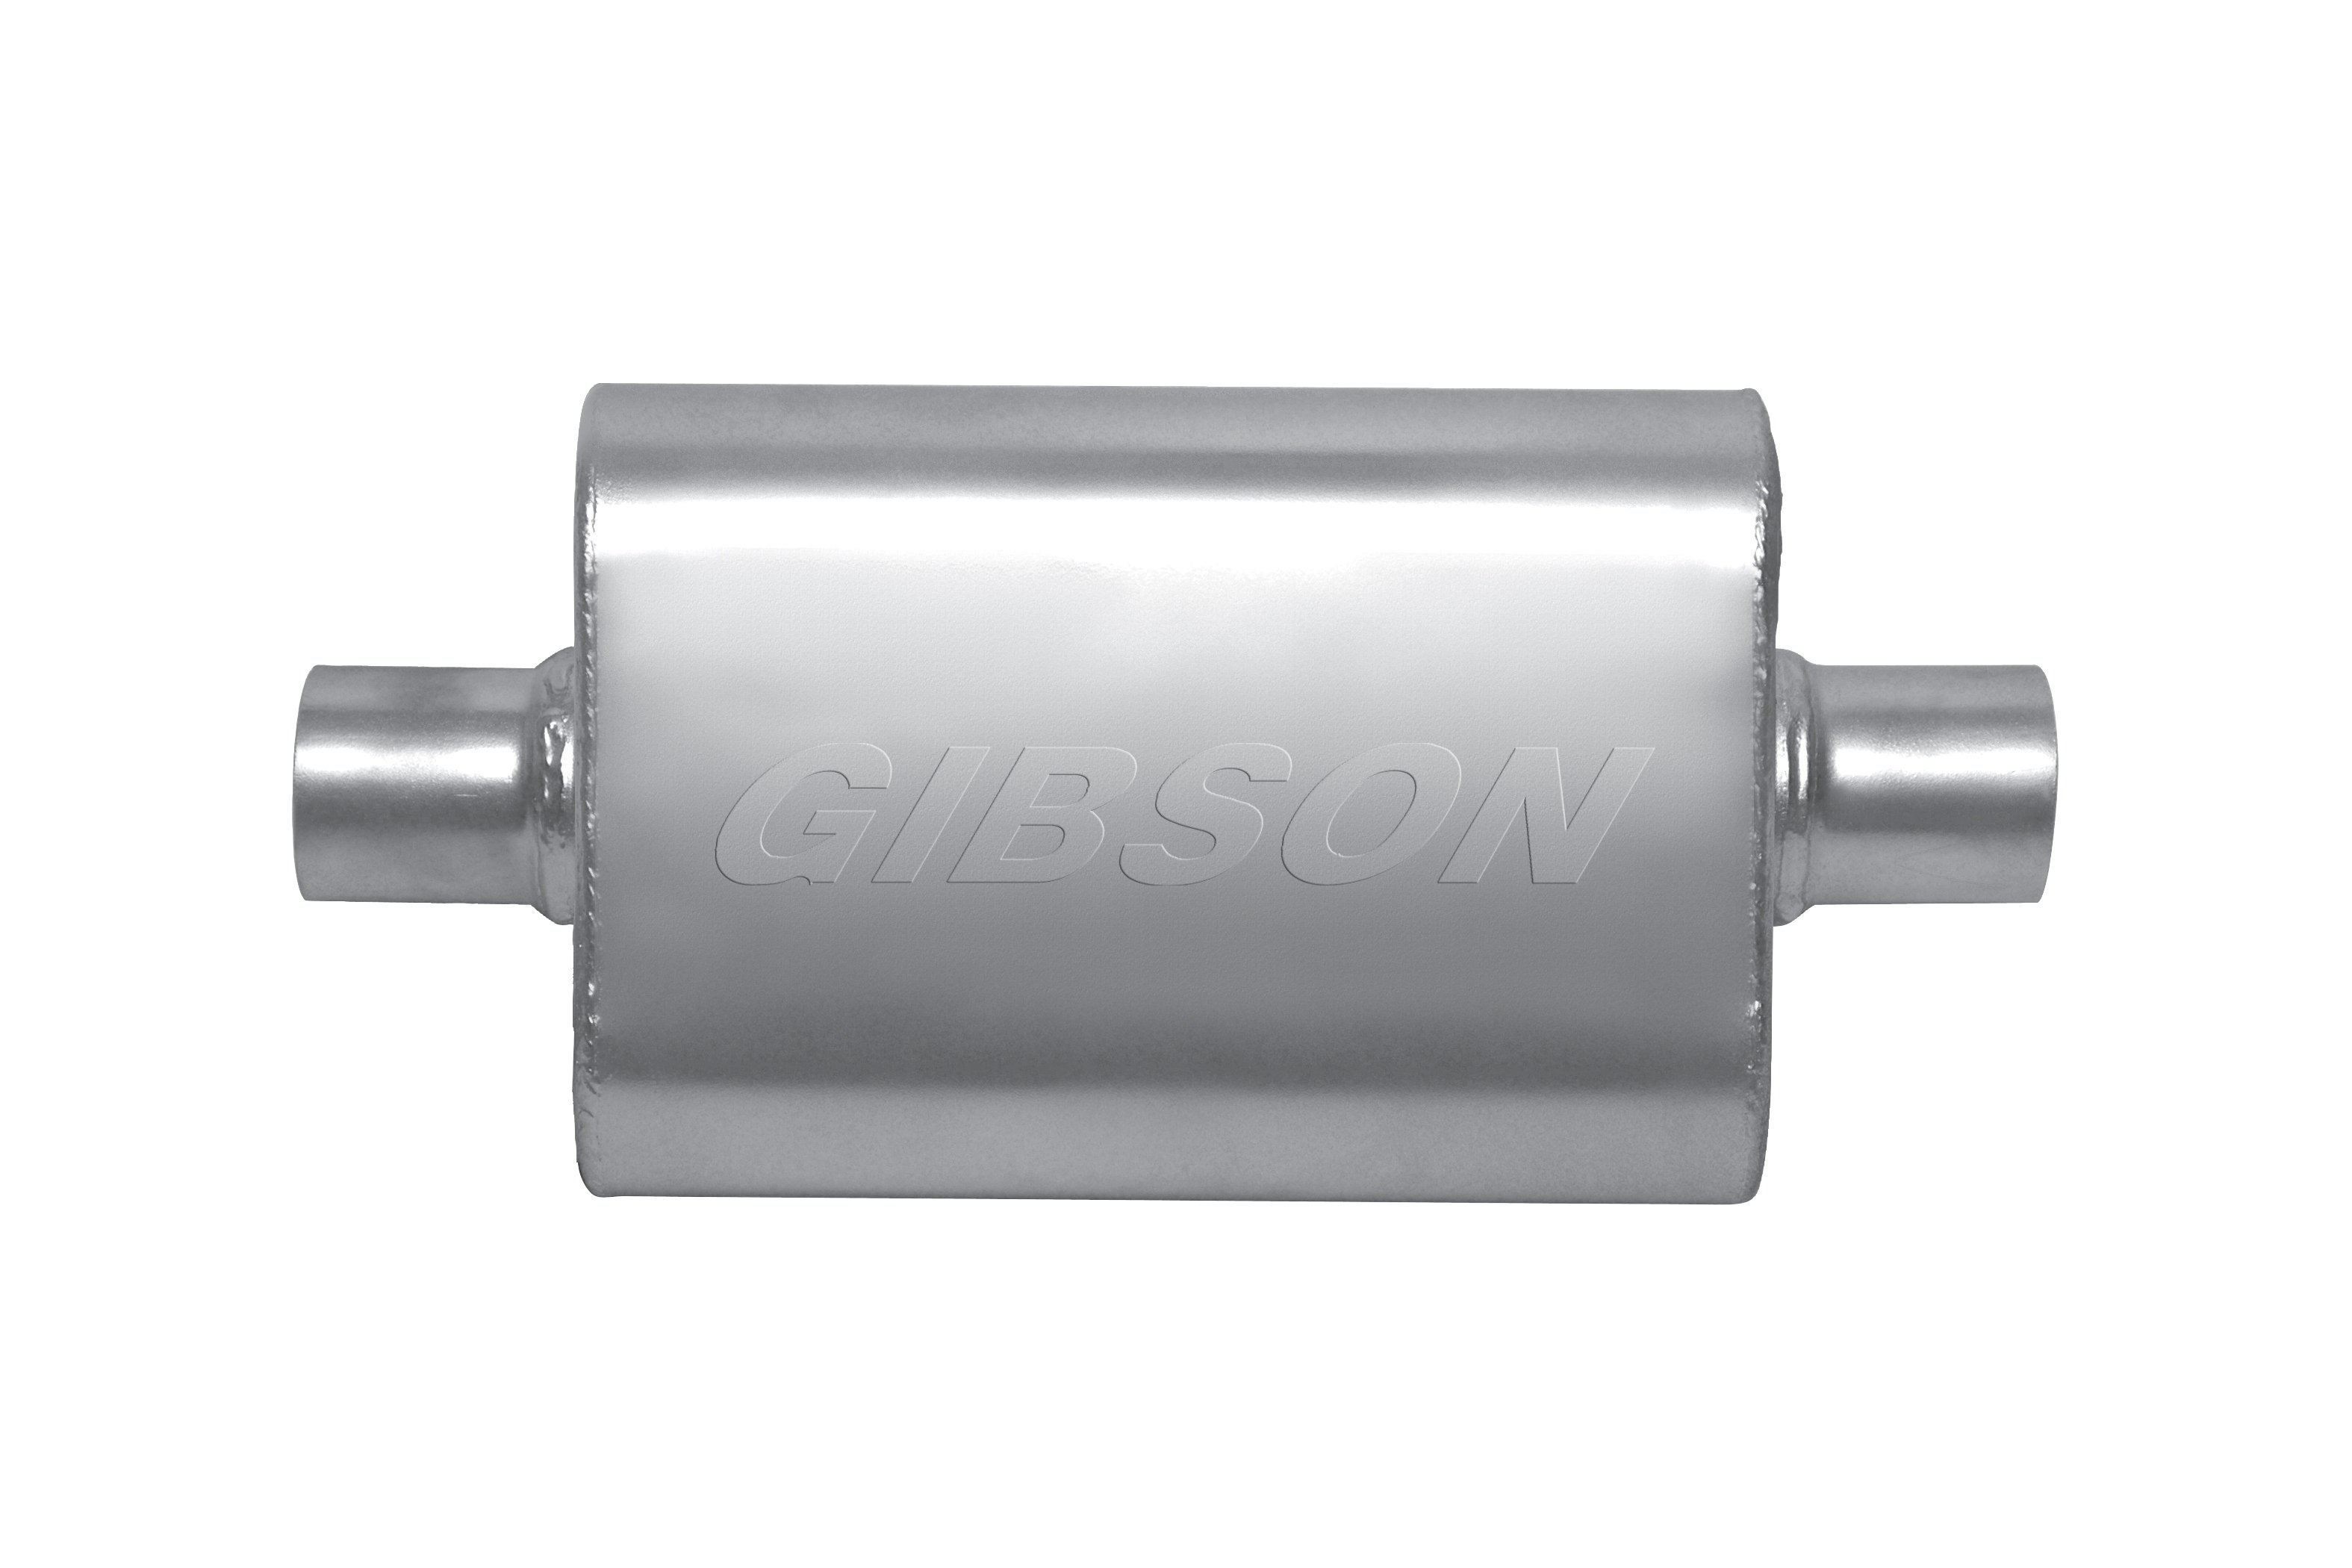 Gibson Exhaust BM0107 Muffler, MWA, 2-1/2 in Center Inlet, 2-1/2 in Center Outlet, 9 in Diameter Body, 14 in Long, Stainless, Universal, Each